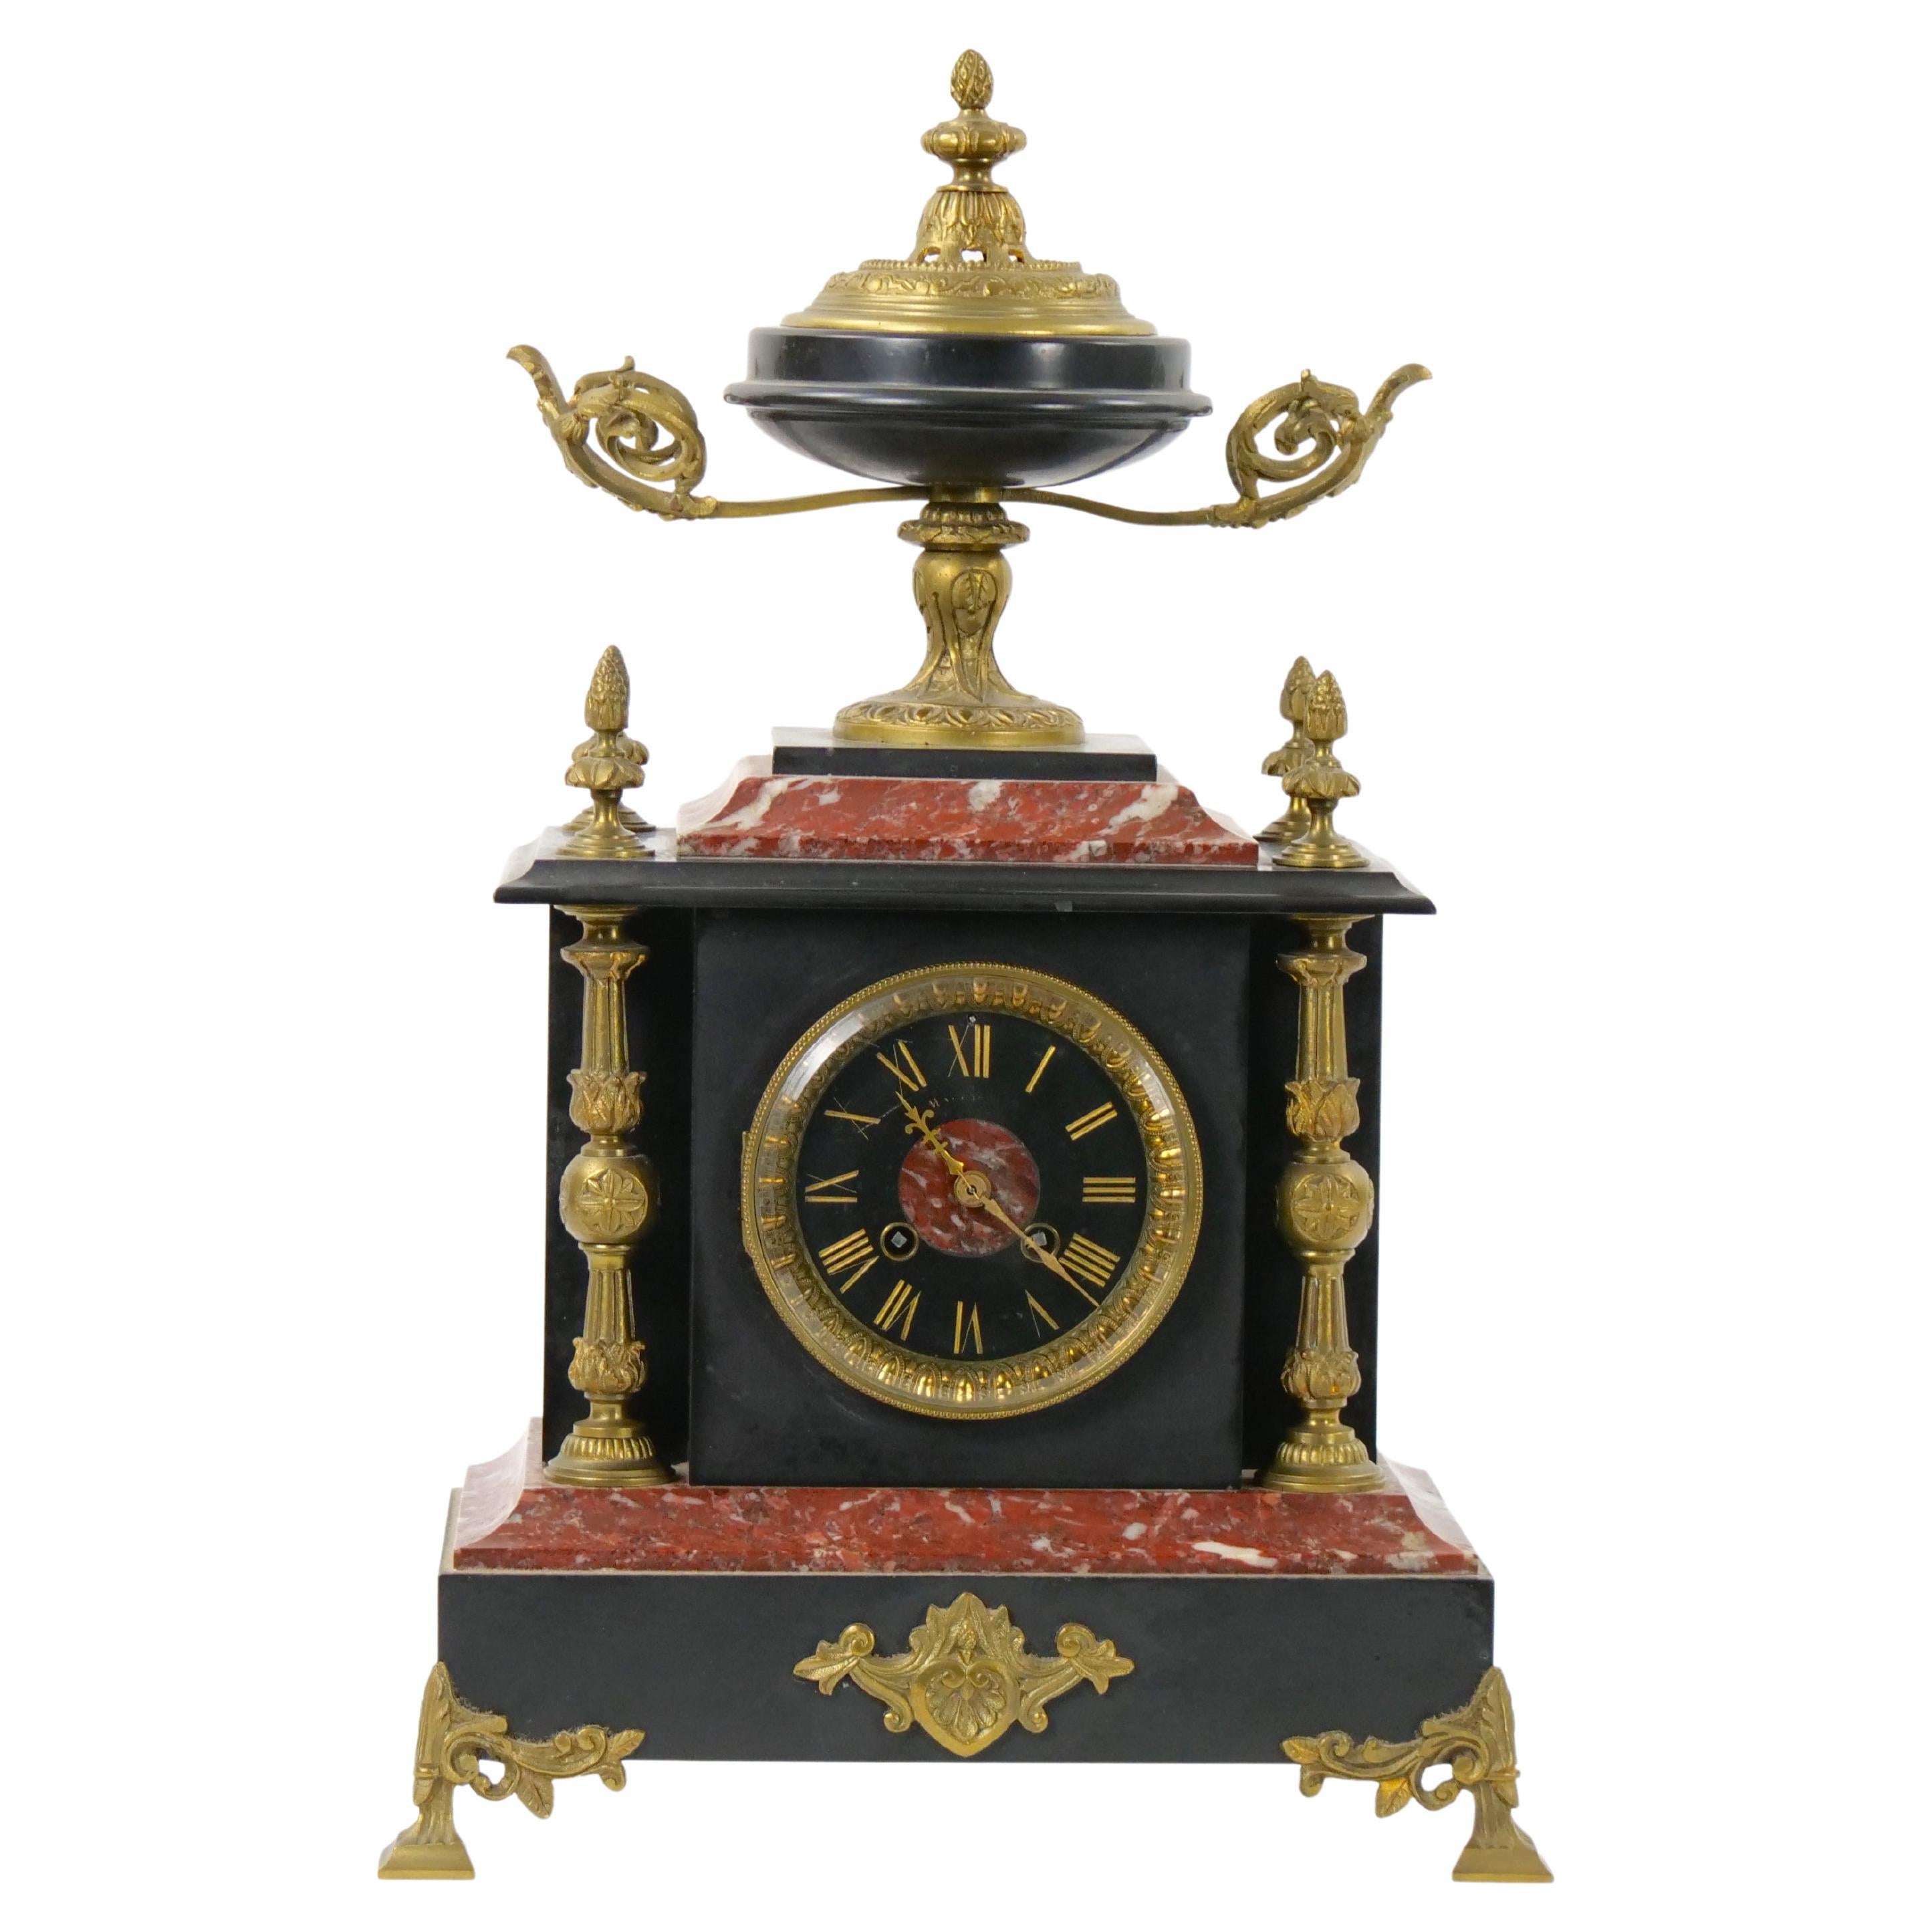 19th Century French Gilt Bronze-Mounted Slate & Rouge Marble Mantel Clock